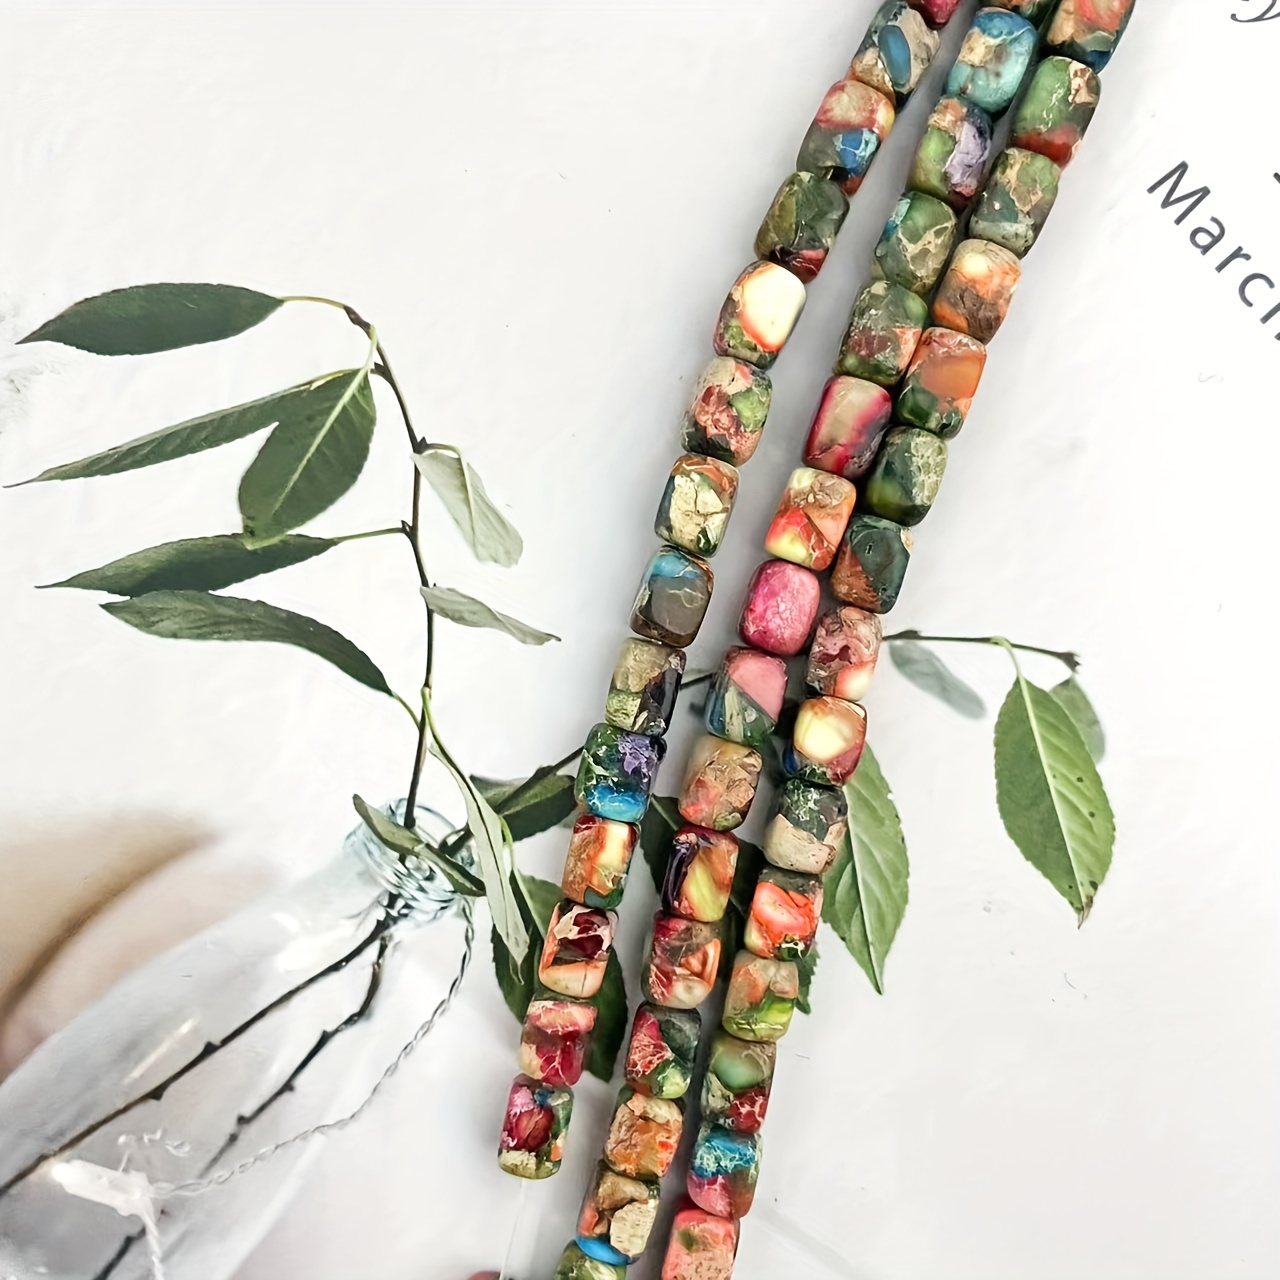 

26pcs Natural Imperial Jasper Geometric Colorful Bohemian Fashion Loose Beads For Diy Bracelets, Necklaces, Earrings, Women's Jewelry Accessories, Couple Gift